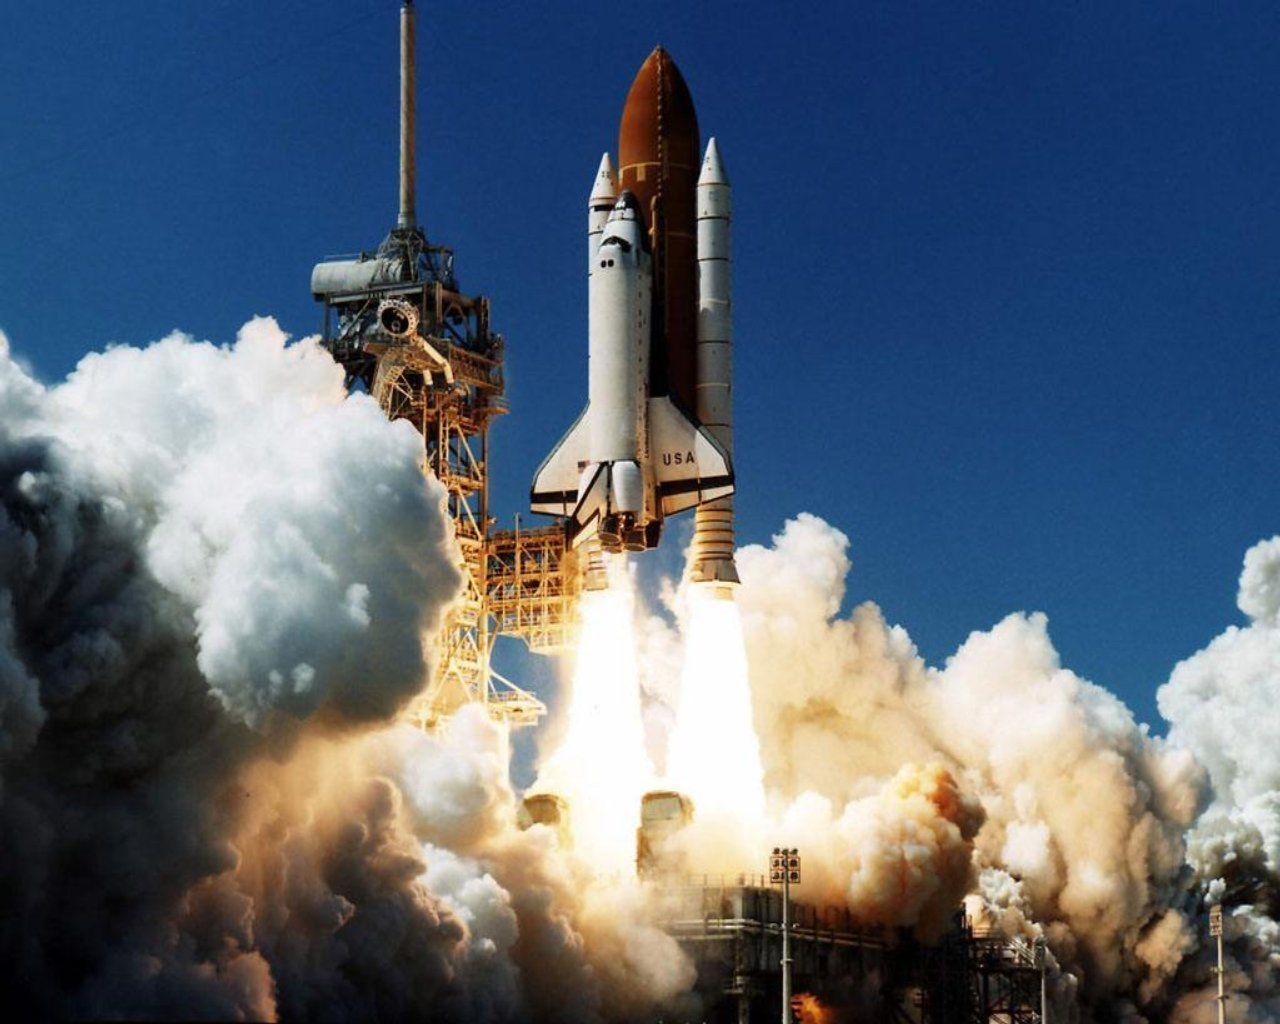 Space shuttle launch, Cape Canaveral Vacation Spots